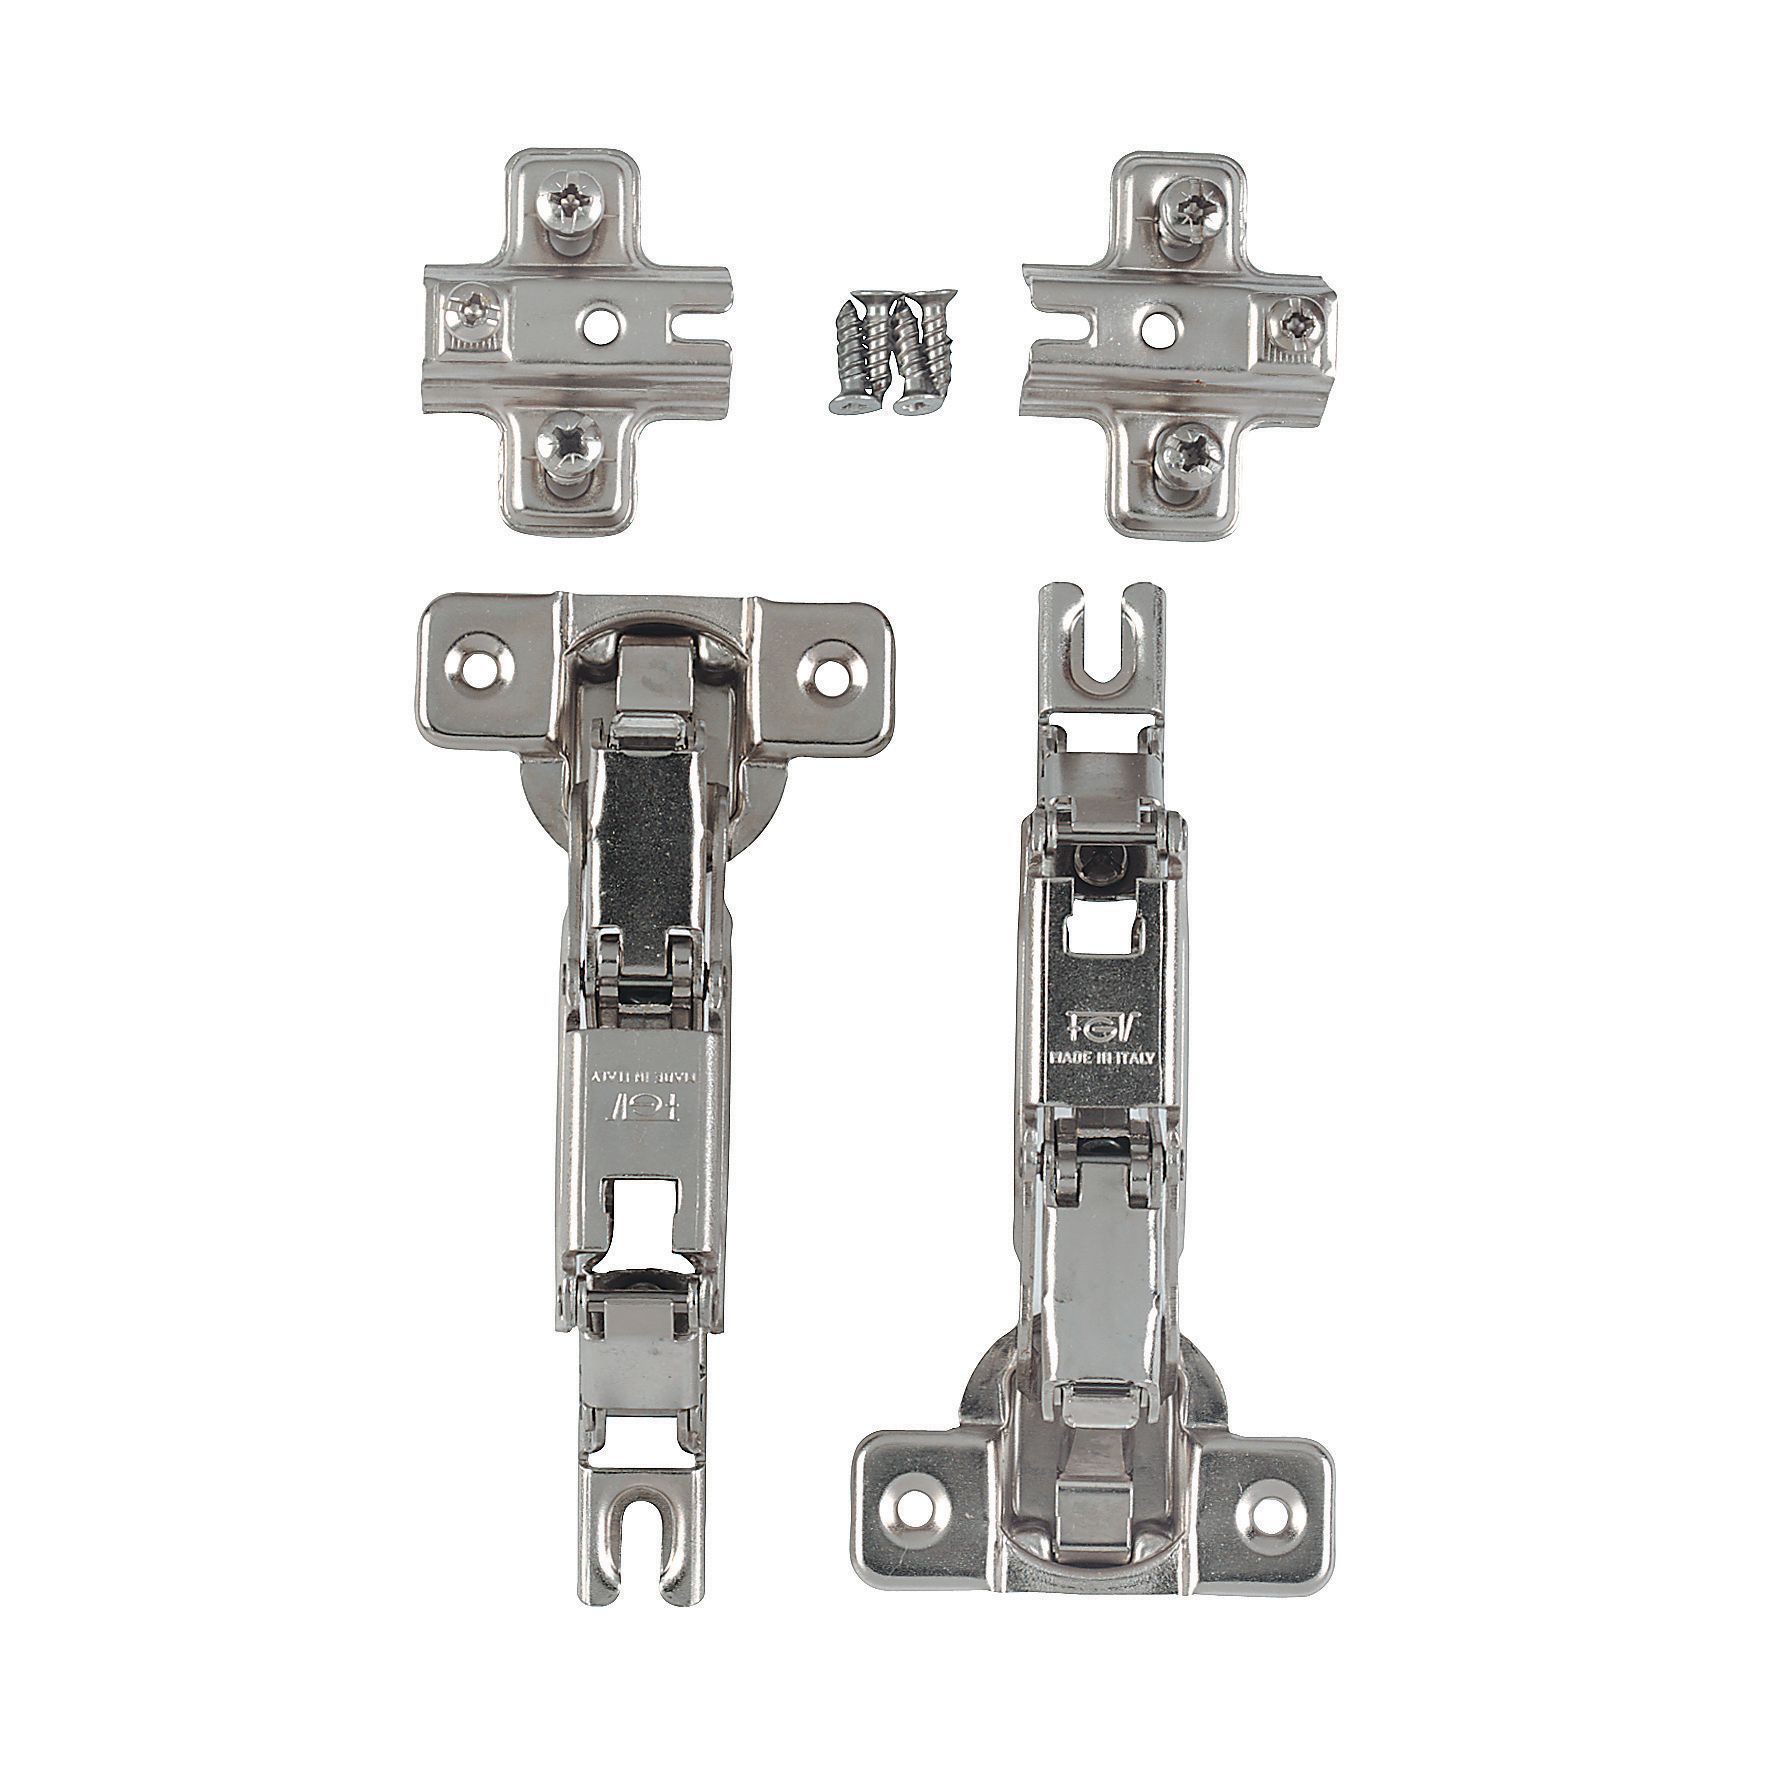 IT Kitchens Standard 170° Cabinet hinge, Pack of 2 | Departments | DIY at B&Q